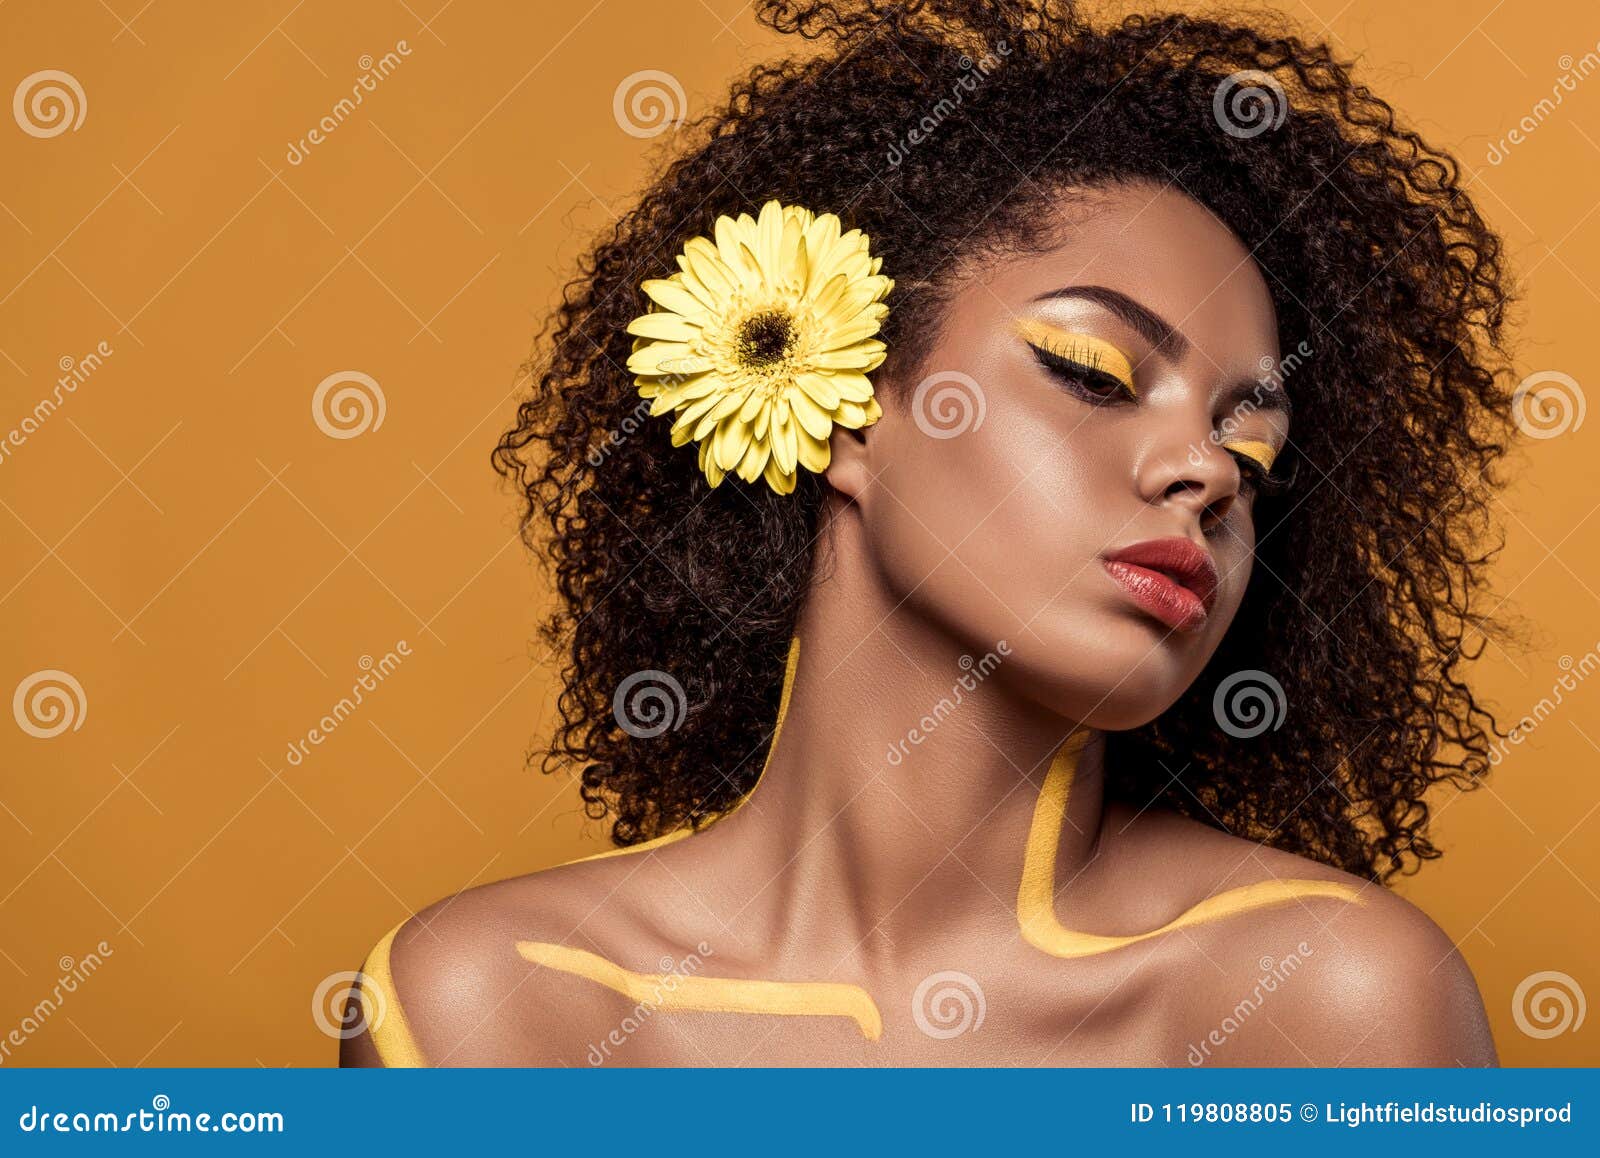 Young Sensual African American Woman with Artistic Make-up and Gerbera in  Hair Stock Image - Image of modeling, people: 119808805